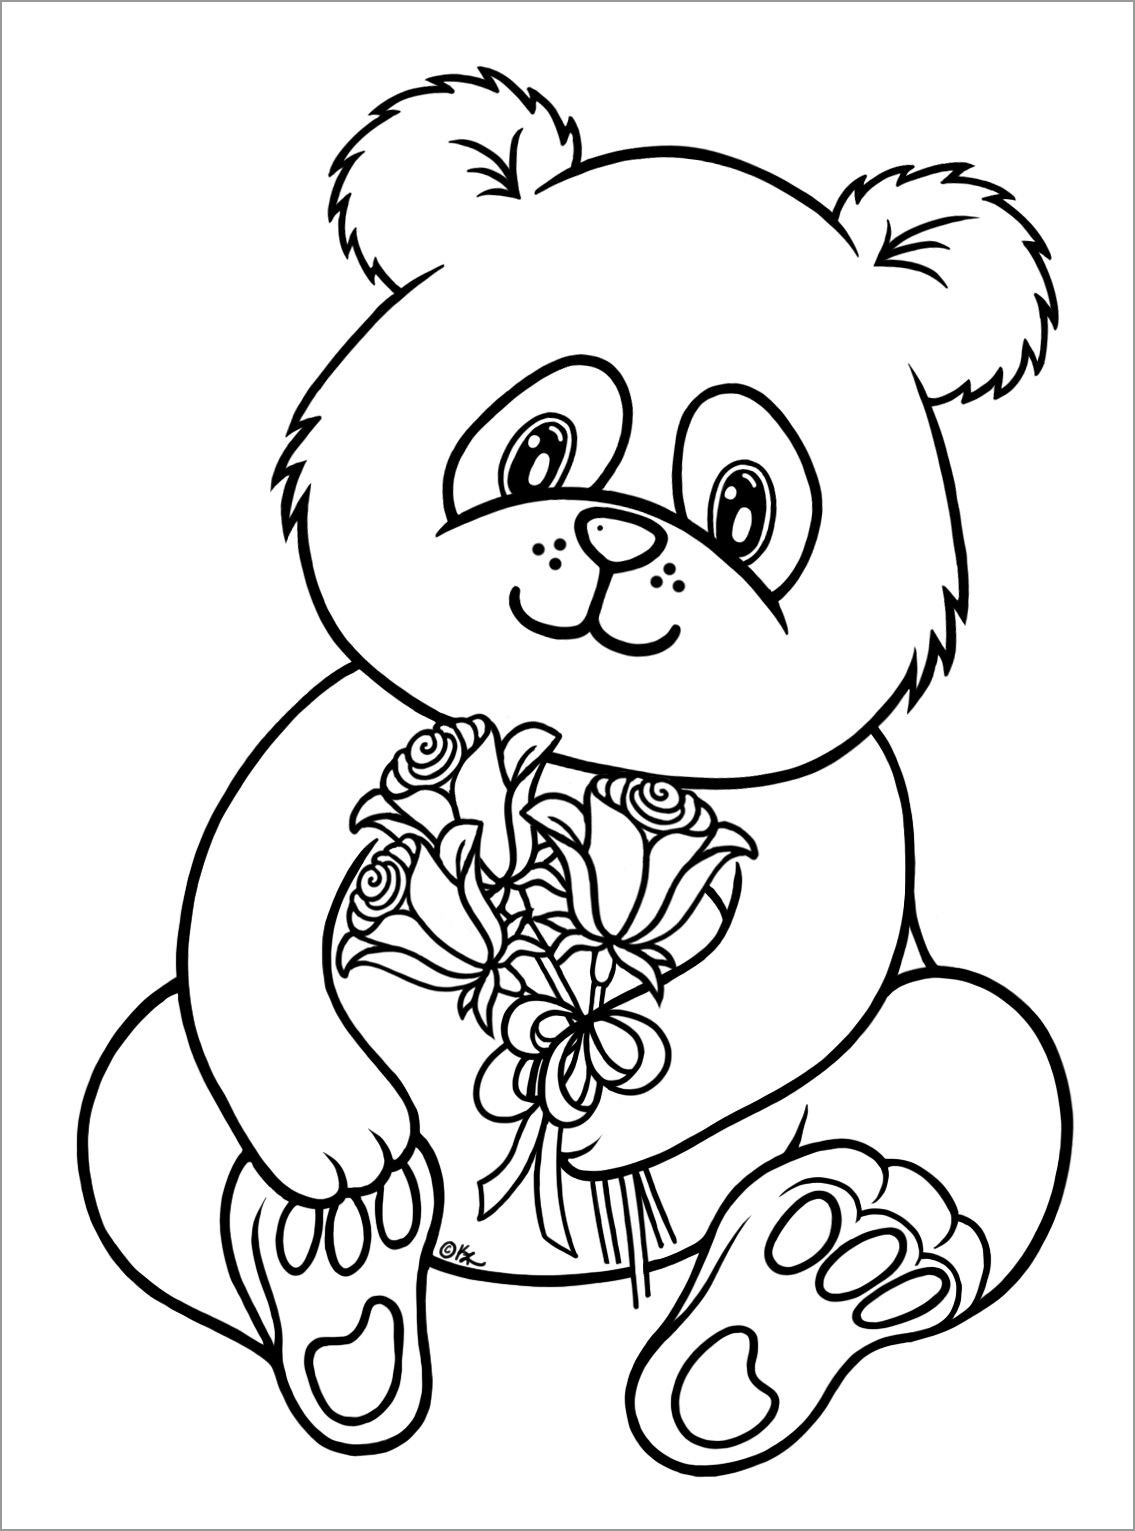 Cute Baby Panda Coloring Pages to Print   ColoringBay